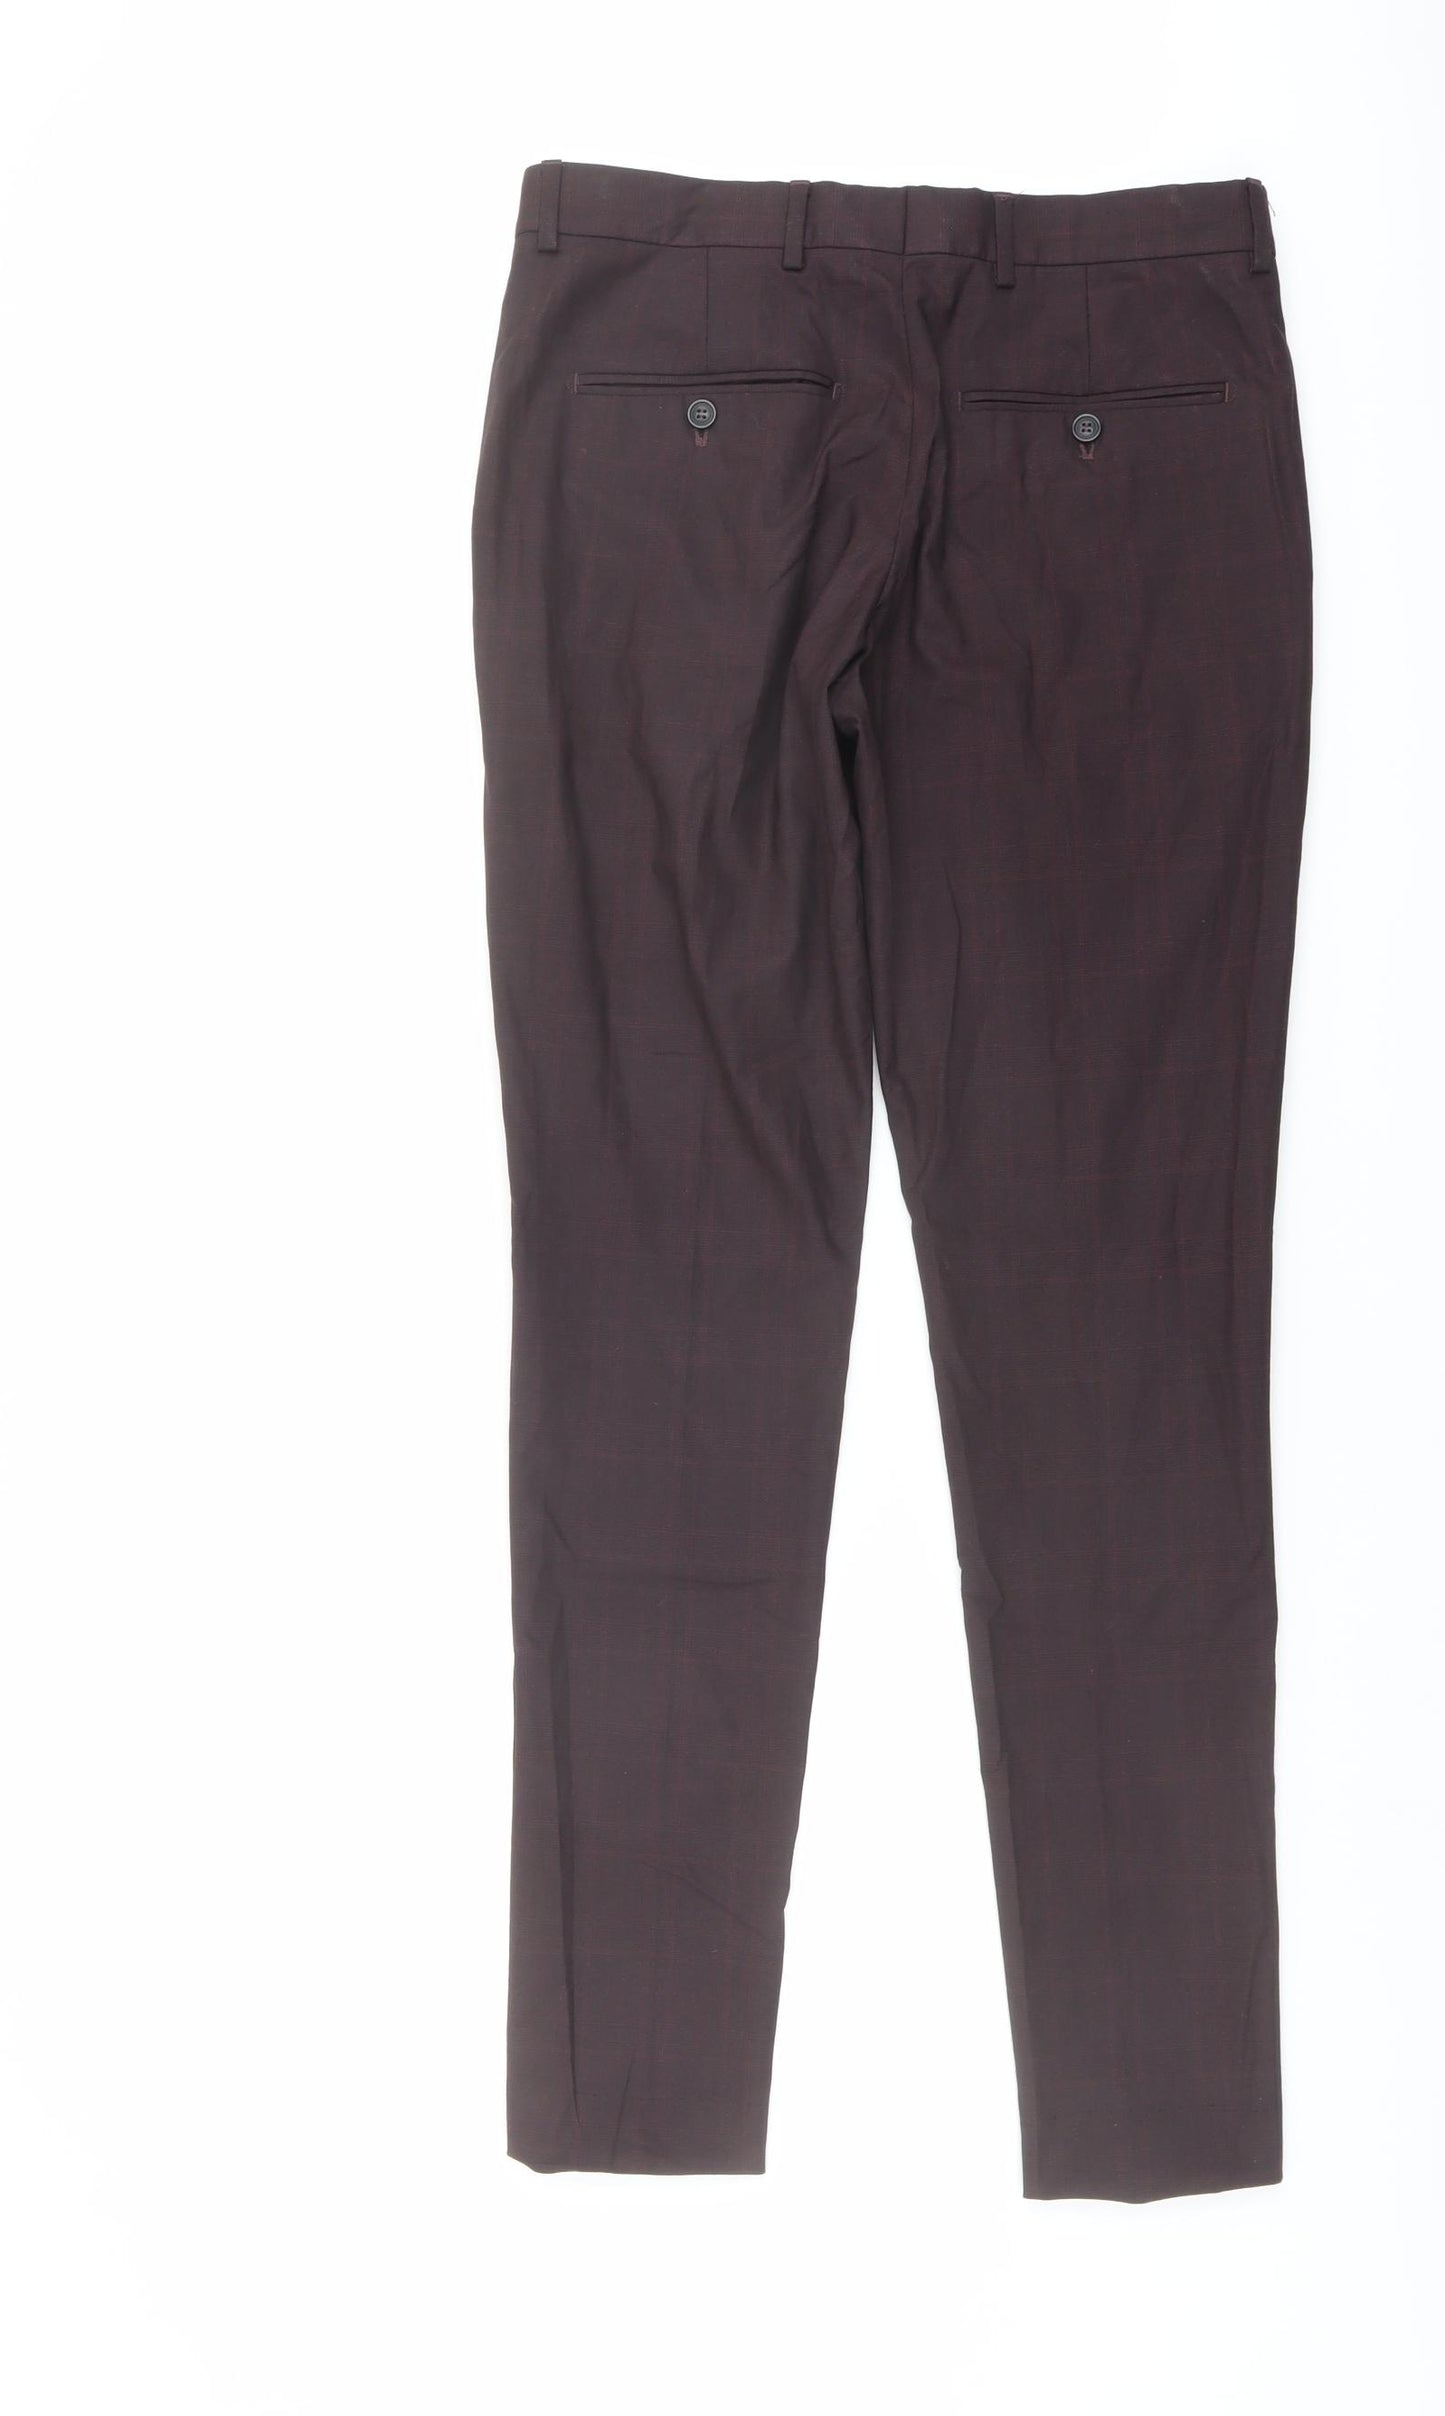 Selected Womens Red Check Polyester Dress Pants Trousers Size 10 L31 in Regular Button